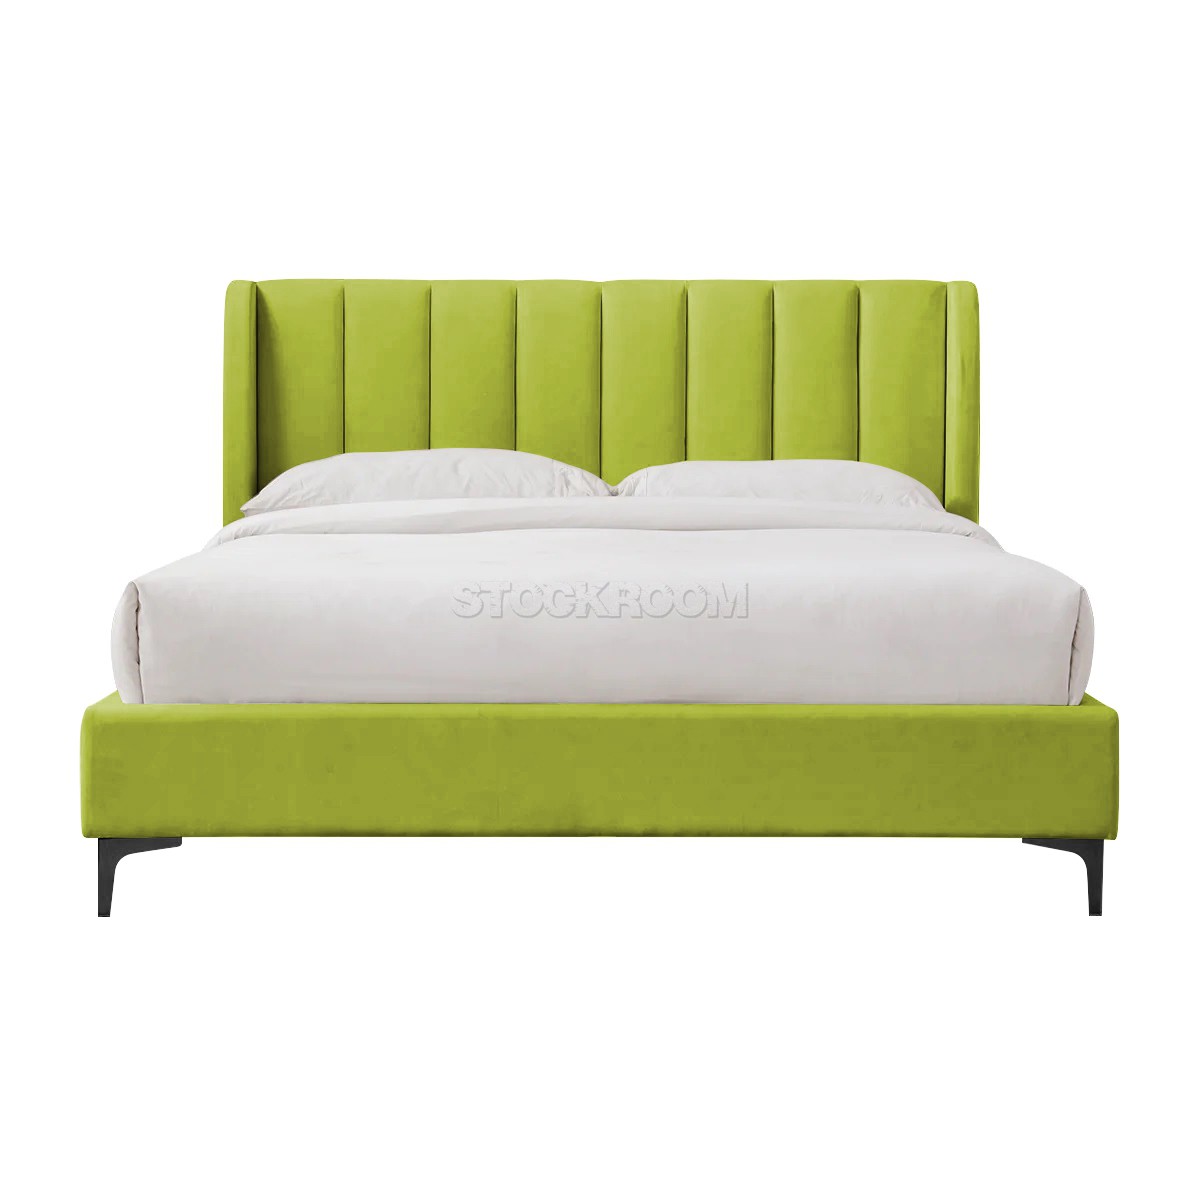 Athen Fabric Upholstered Bed Frame With Different Leg Color Options